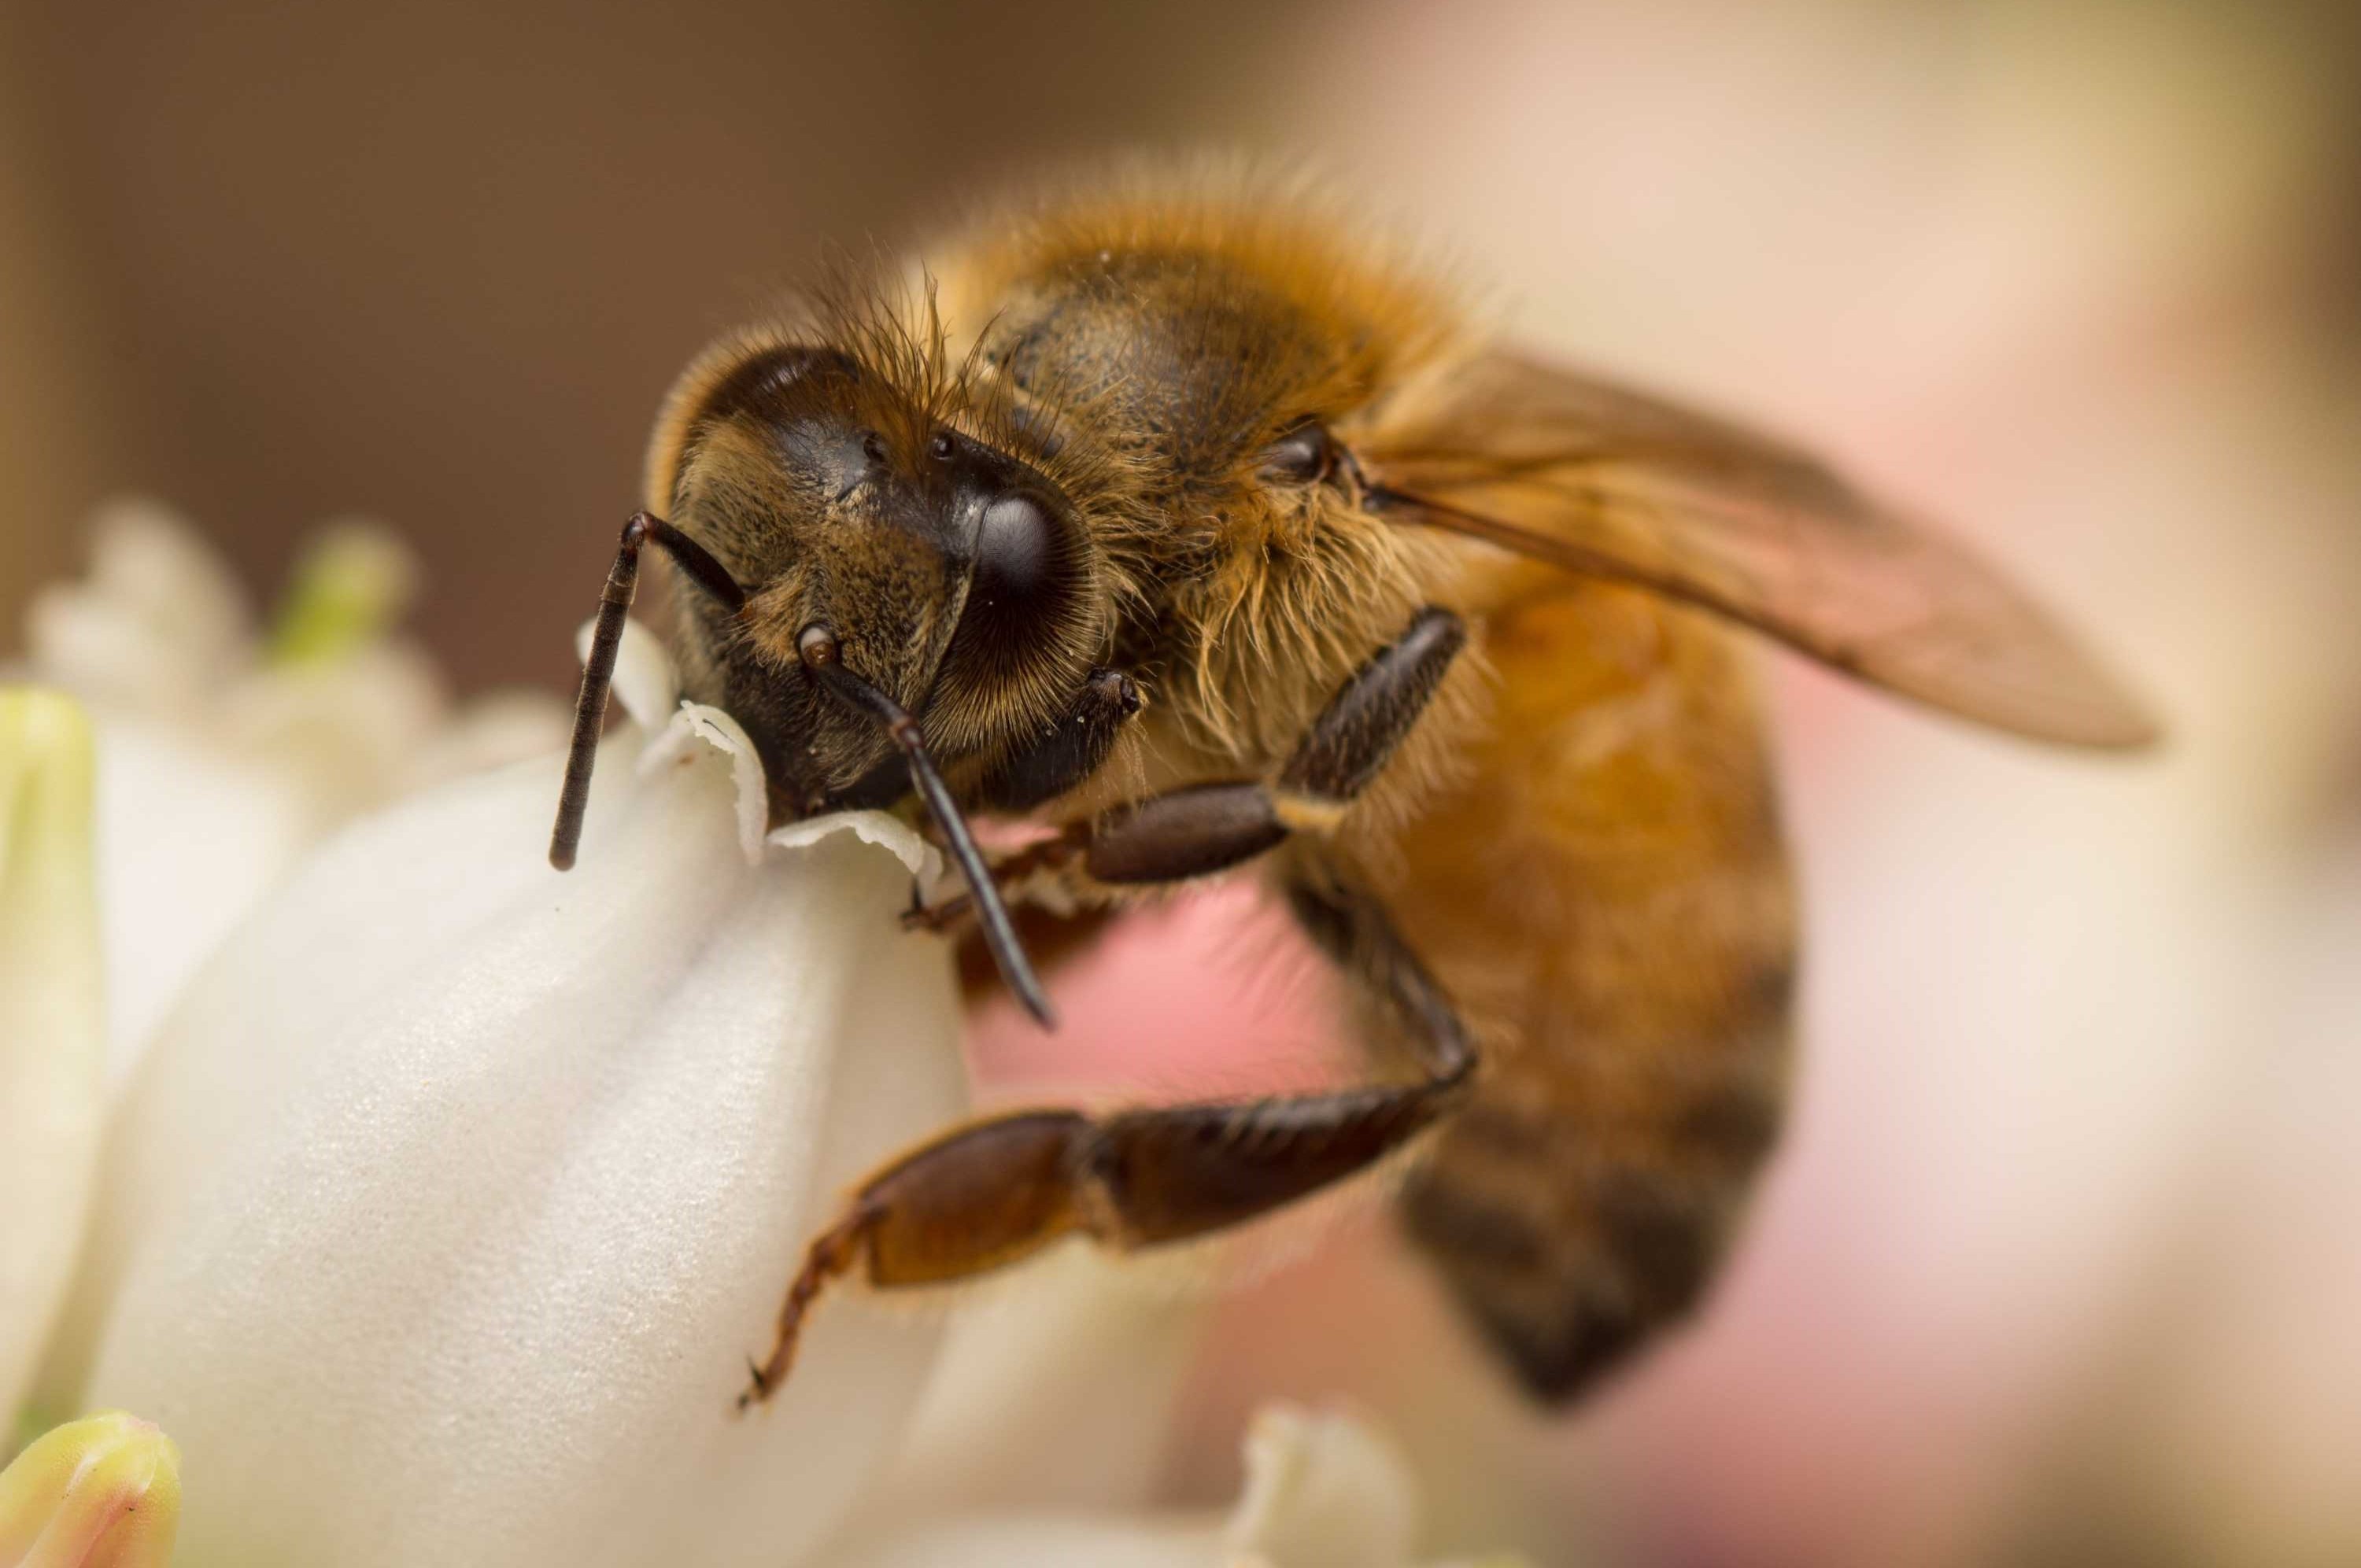 A European honey bee squeezing its head into a flower for pollen.